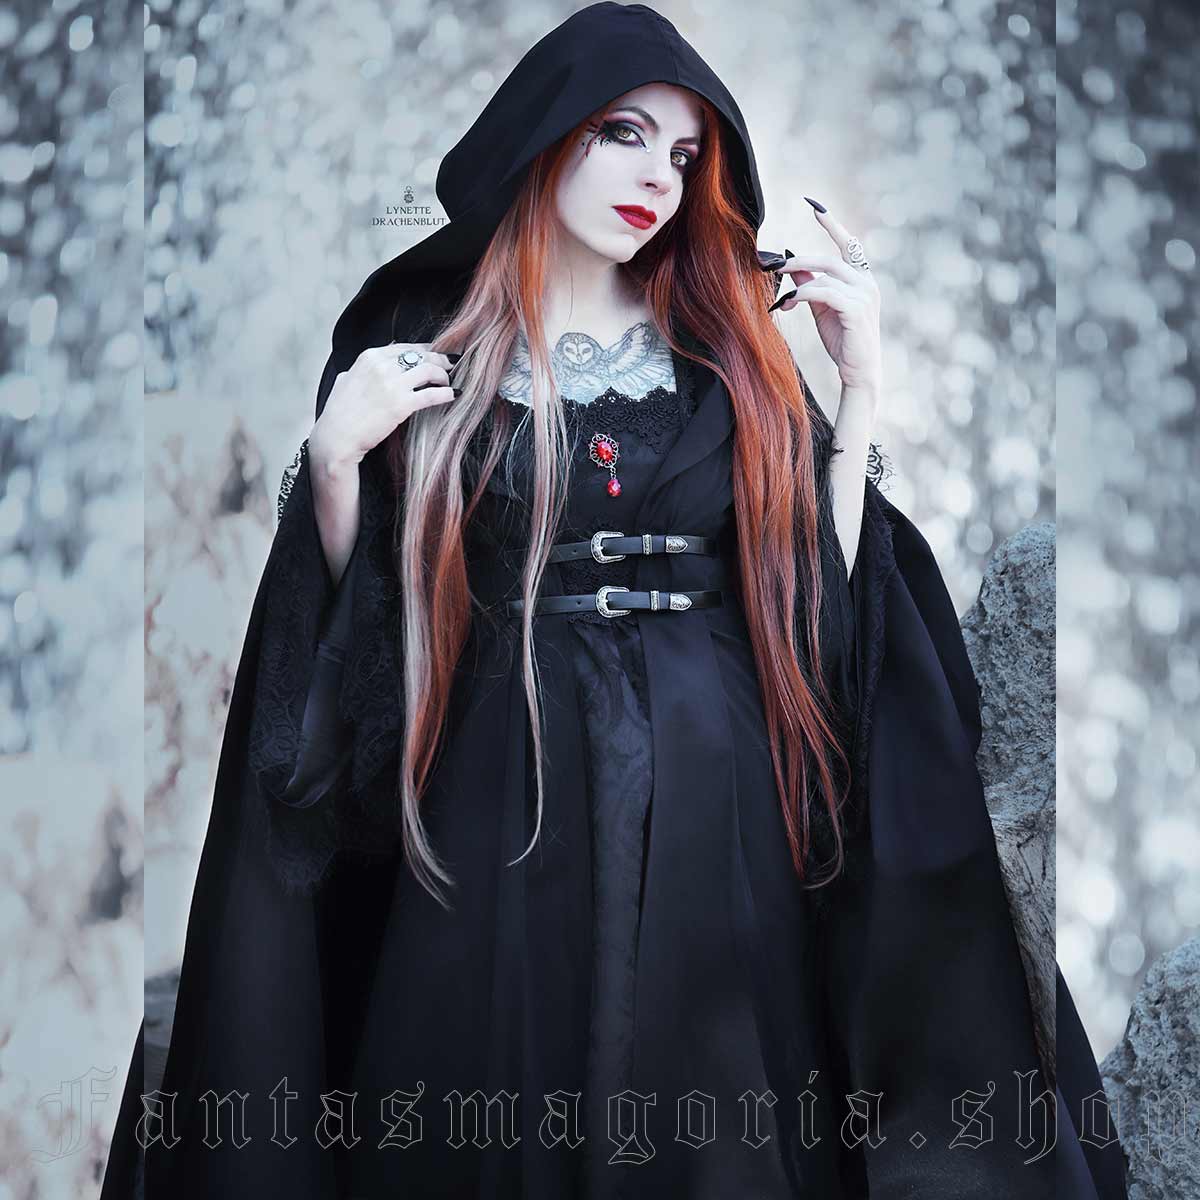 Women`s witchy black hooded long cloak.